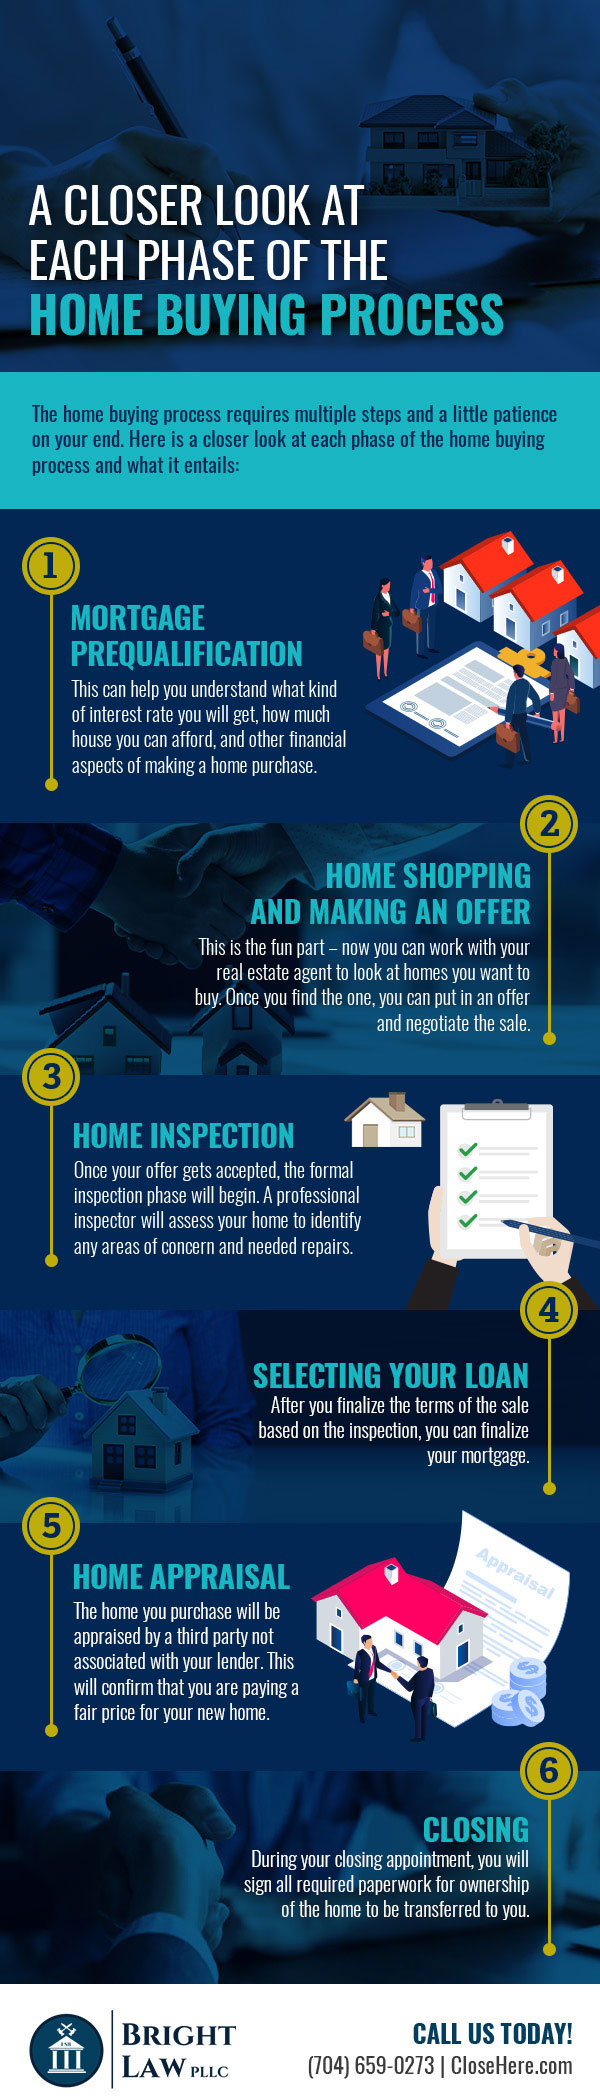 A Closer Look at Each Phase of the Home Buying Process